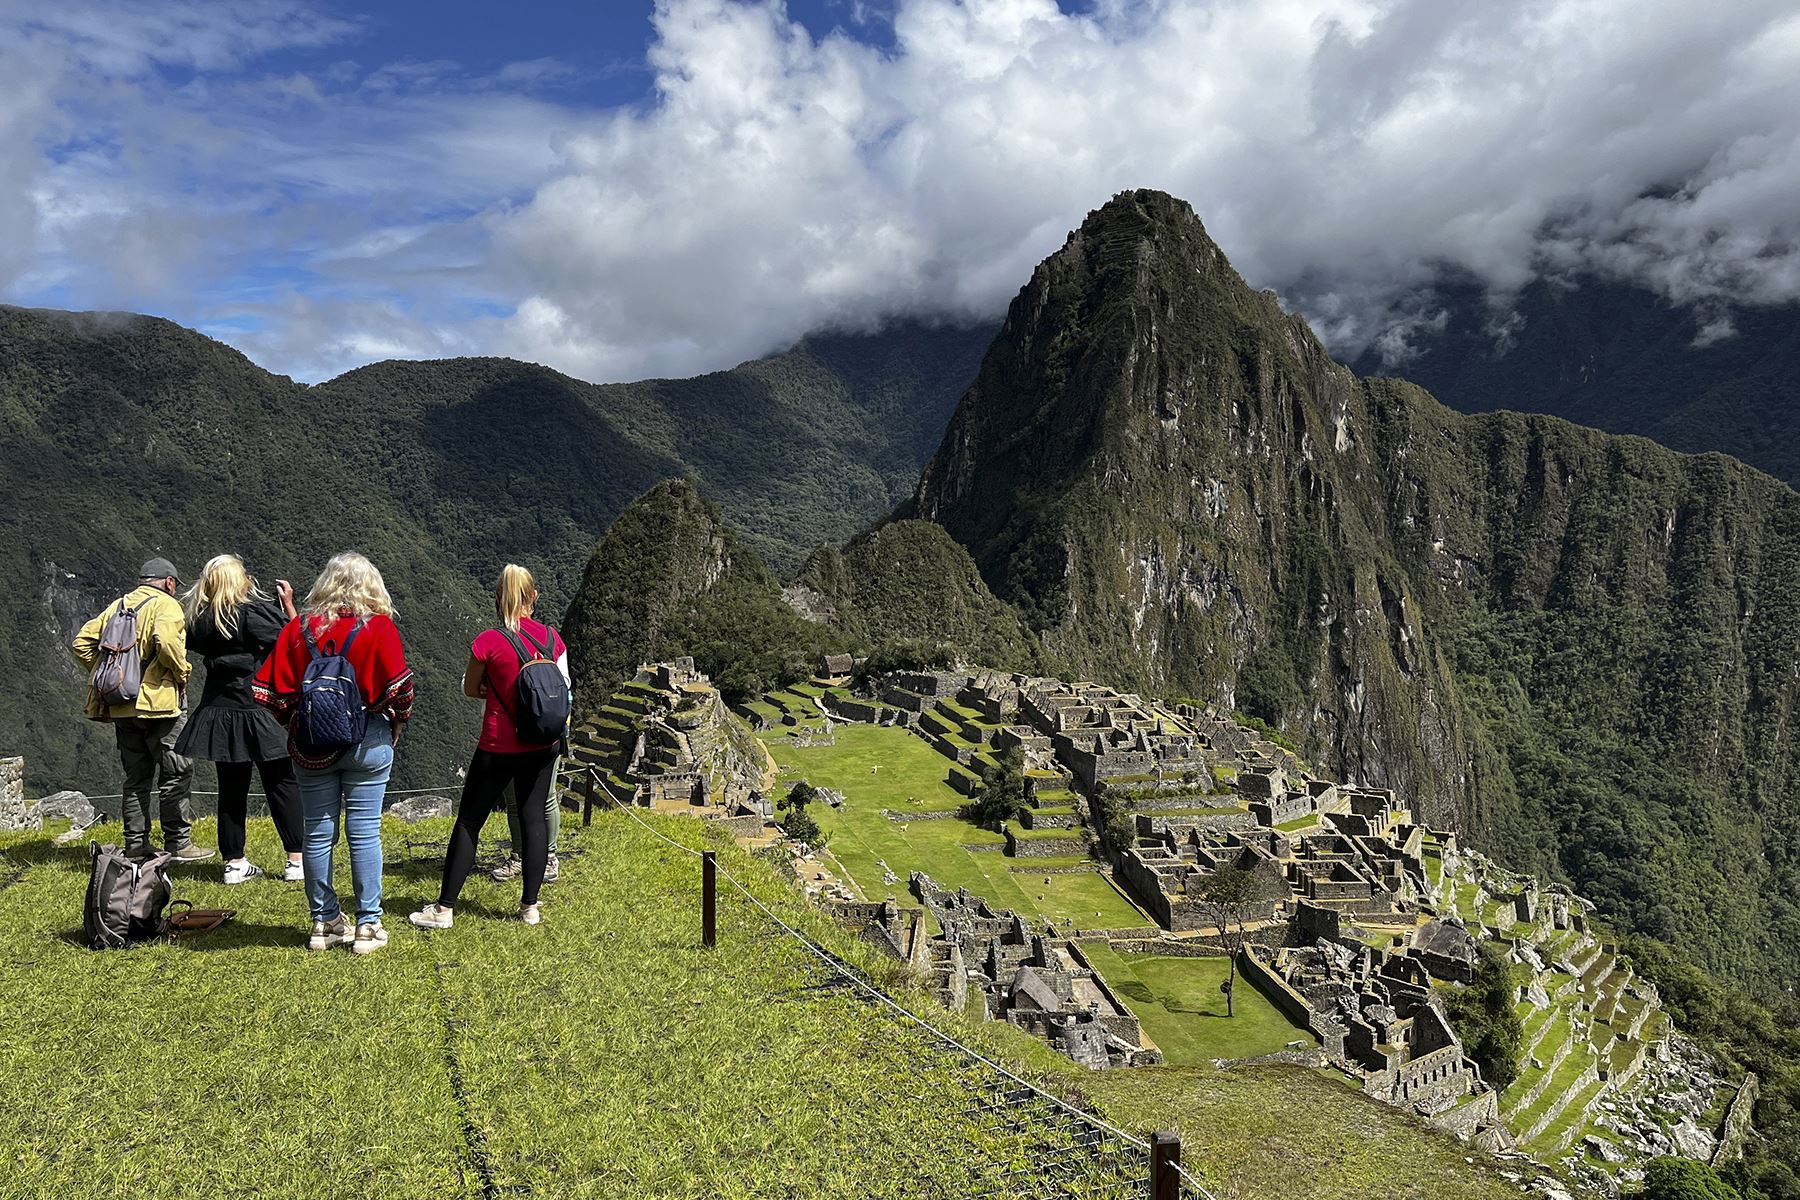 Peru: Tourist arrivals expected to rise 50% thanks to “Transformers: Rise of the Beasts”